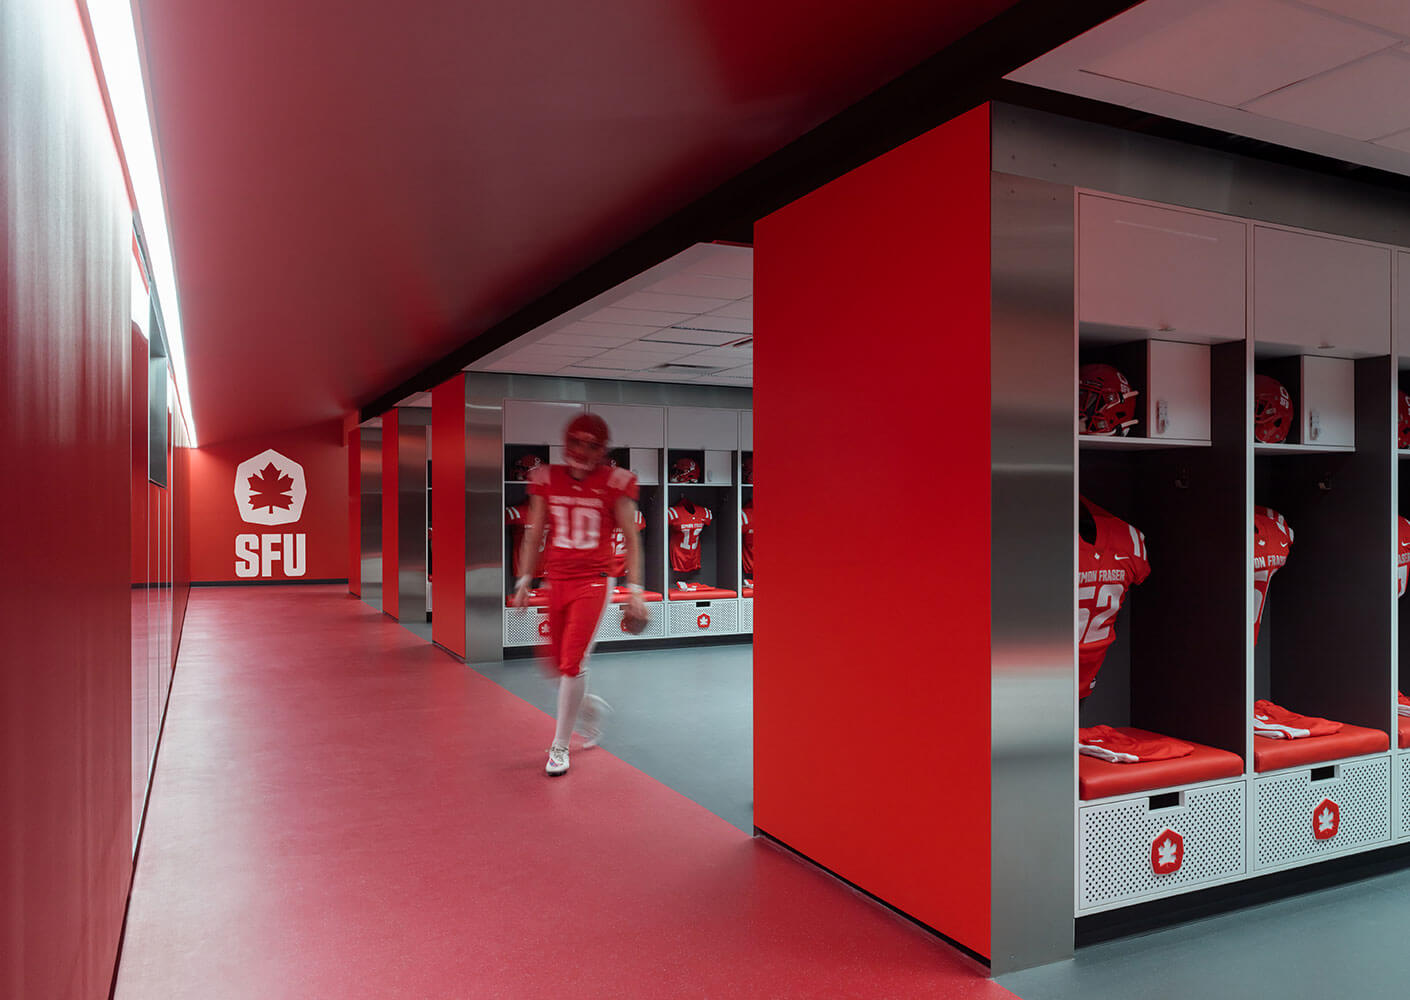 Player walking out from central bay of lockers in the football locker room at SFU stadium.